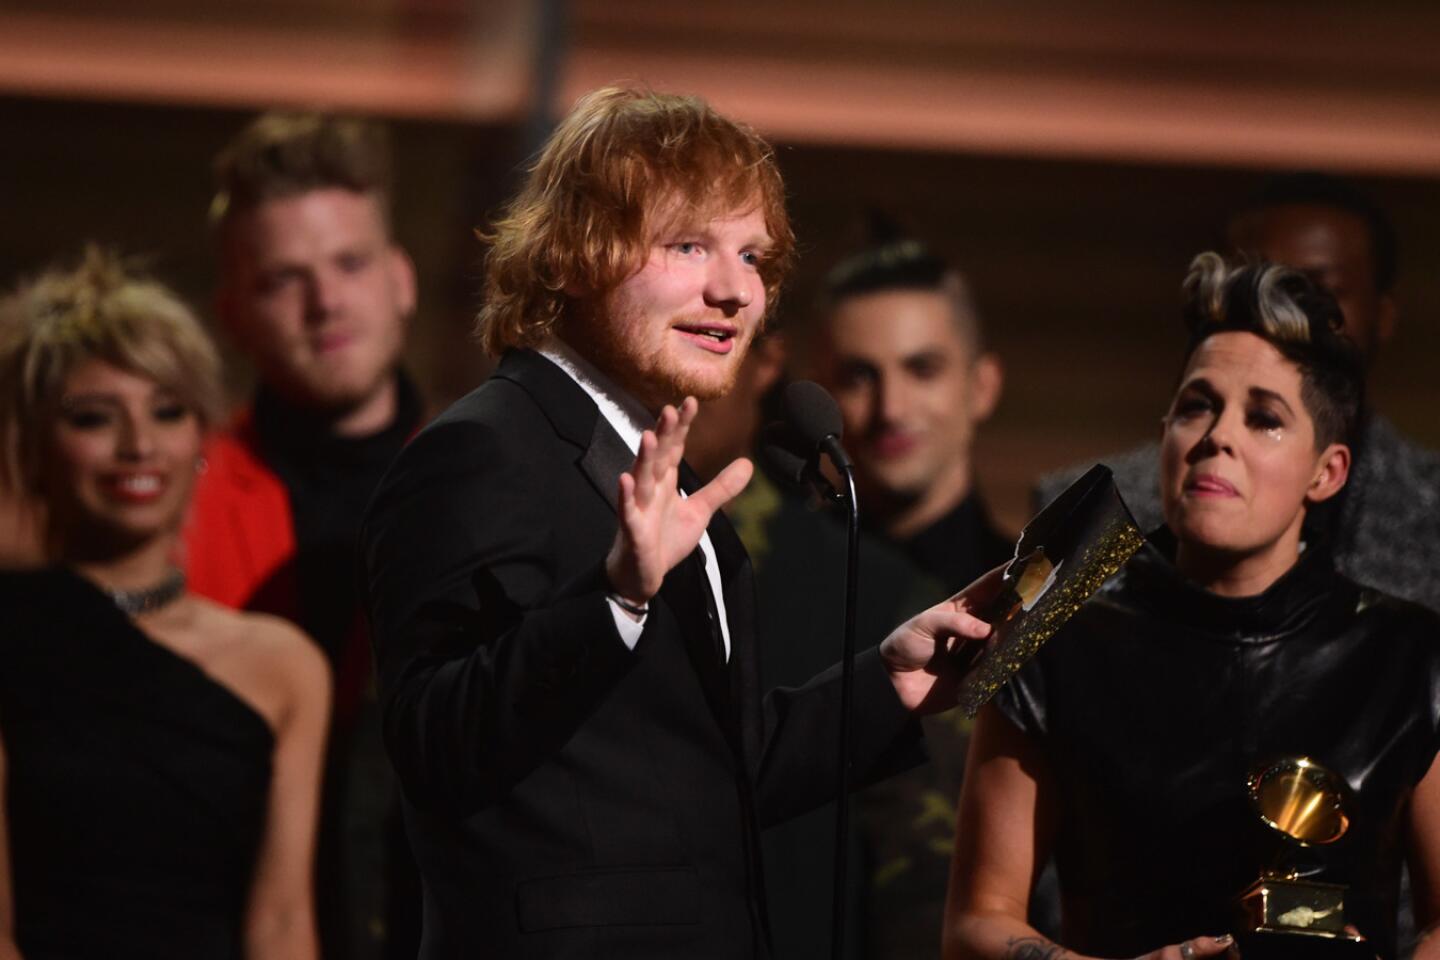 Ed Sheeran recieves the award for song of the year, "Thinking Out Loud."